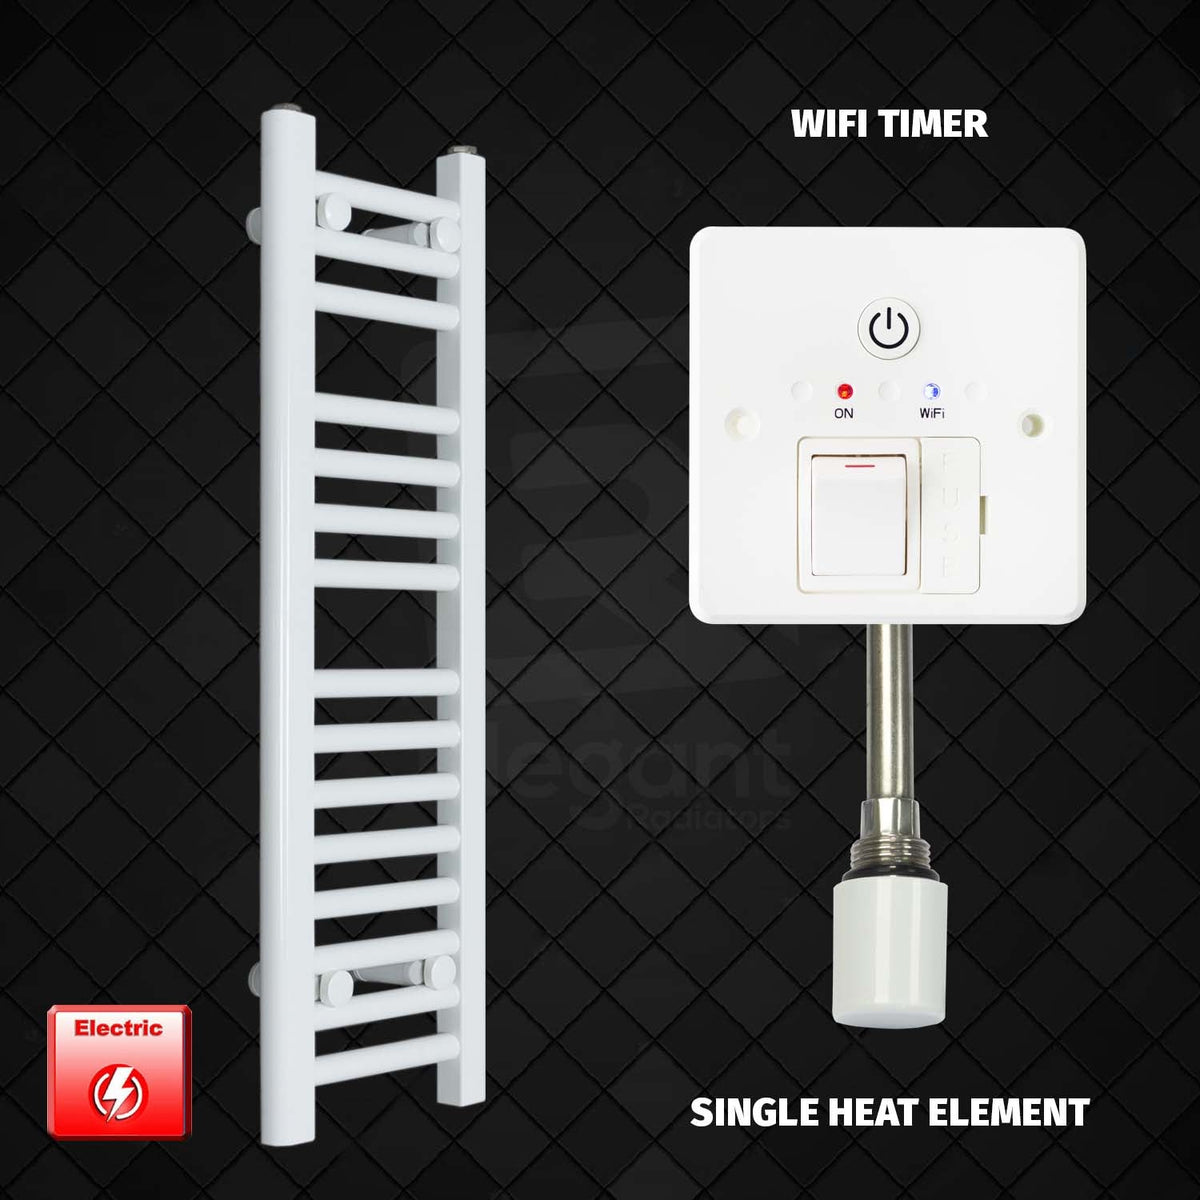 800 mm High 250 mm Wide Pre-Filled Electric Heated Towel Rail Radiator White Wifi Timer